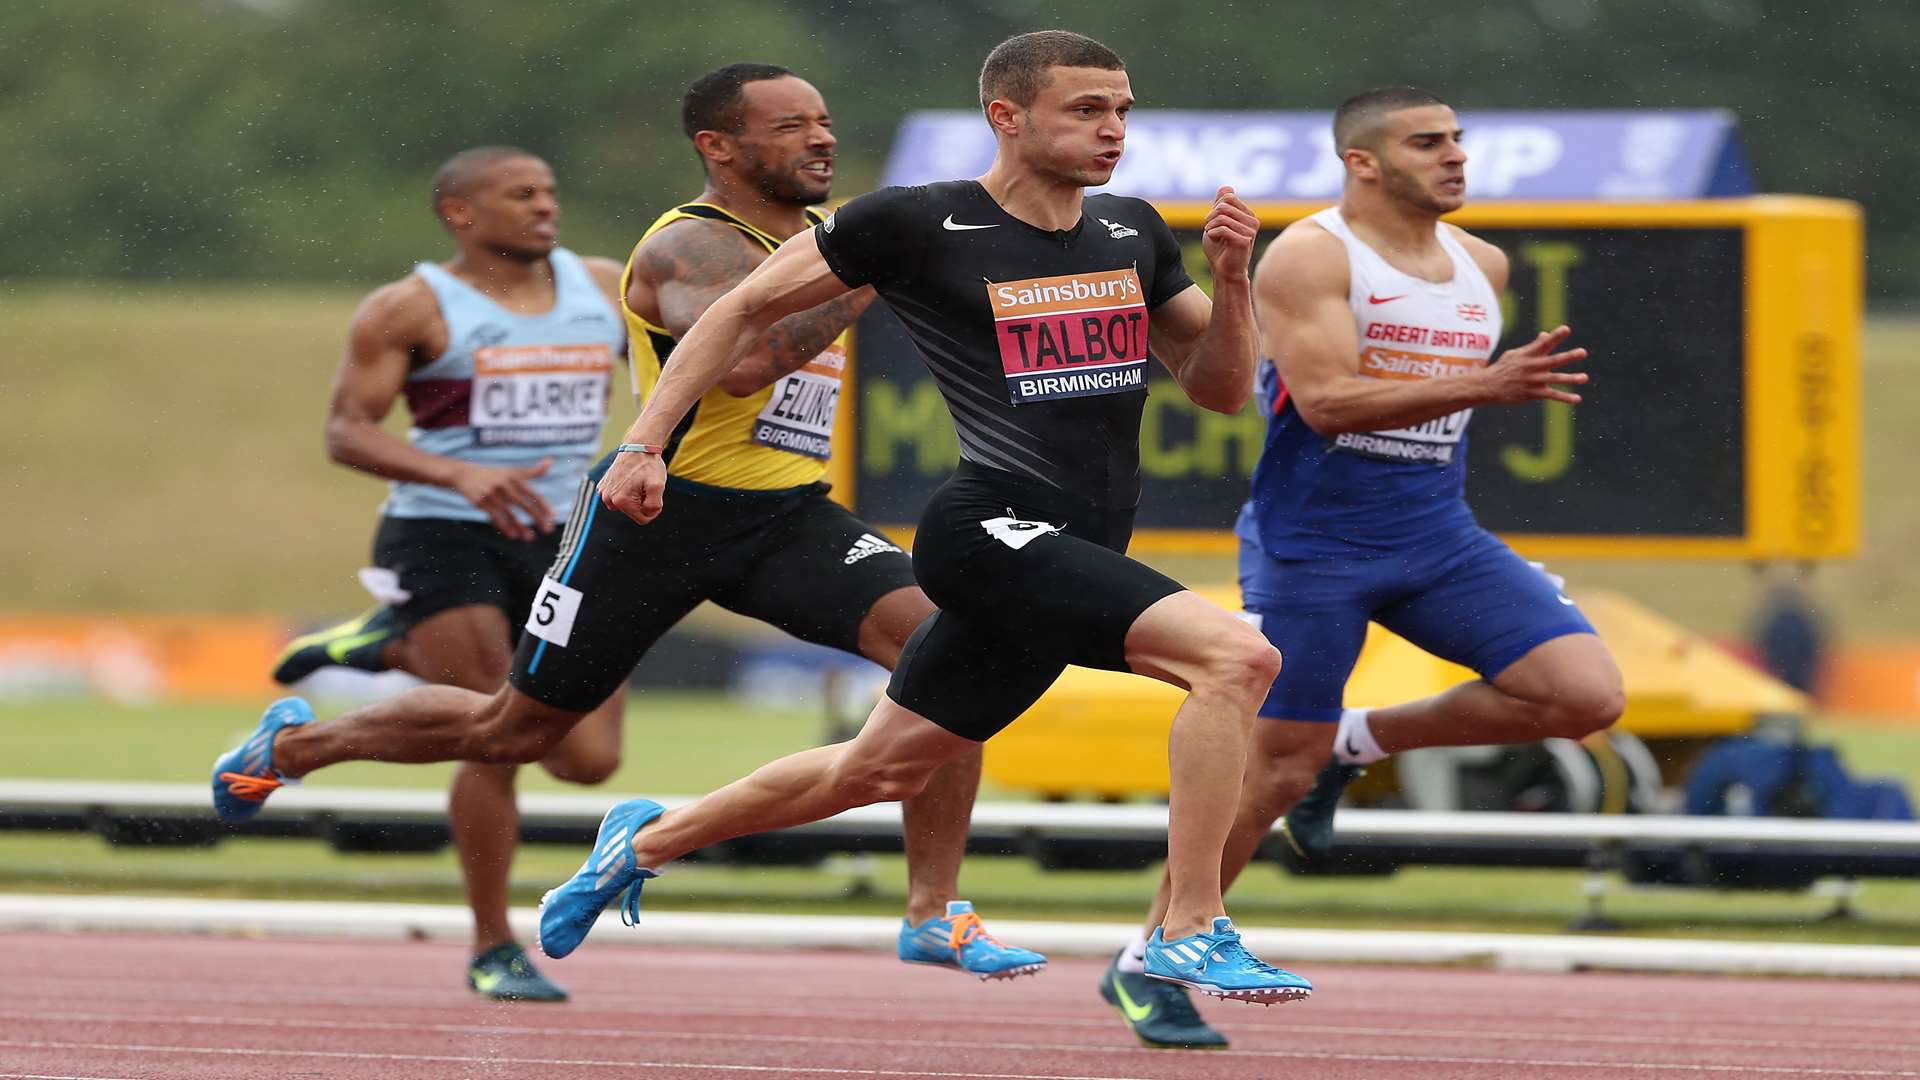 Adam Gemili in action. Picture: Stephen Pond/Getty Images